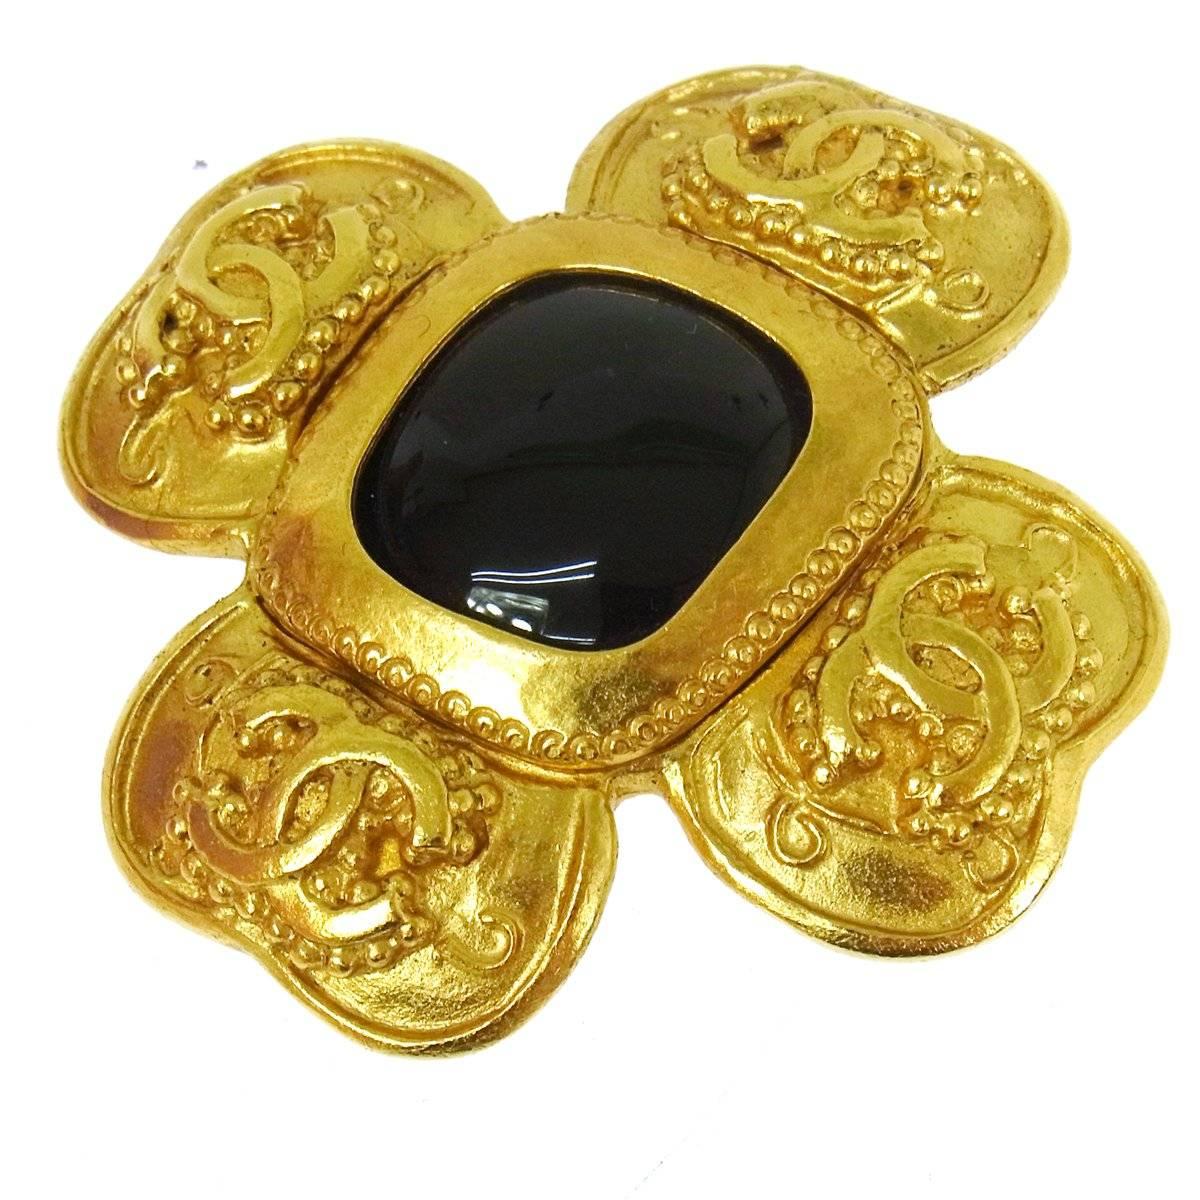 Chanel Vintage Textured Gold Charm Black Poured Glass Pin Brooch in Box